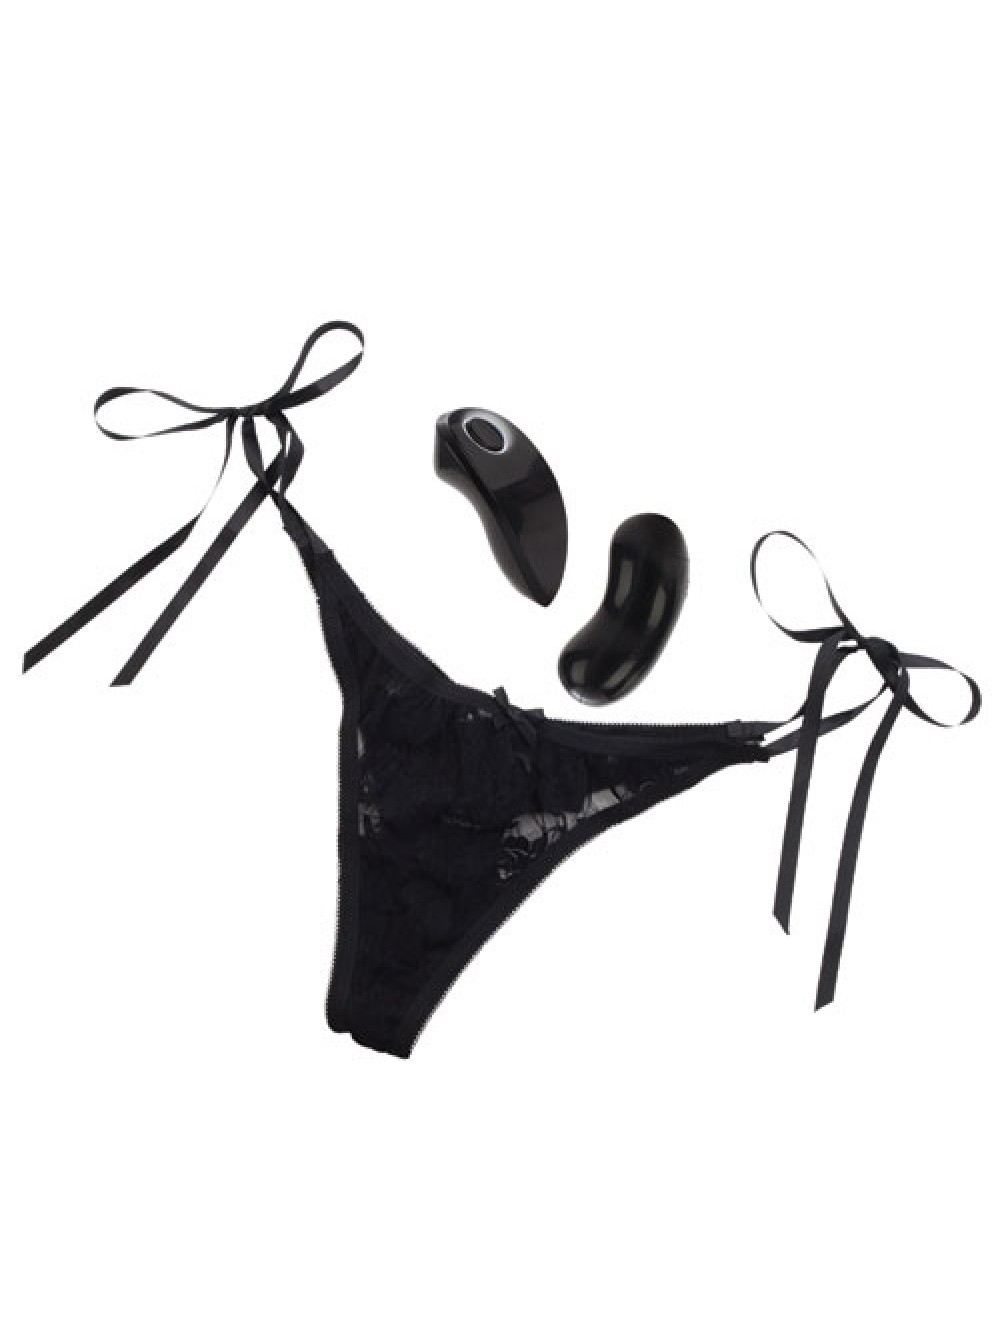 10 Function Remote Control Thong